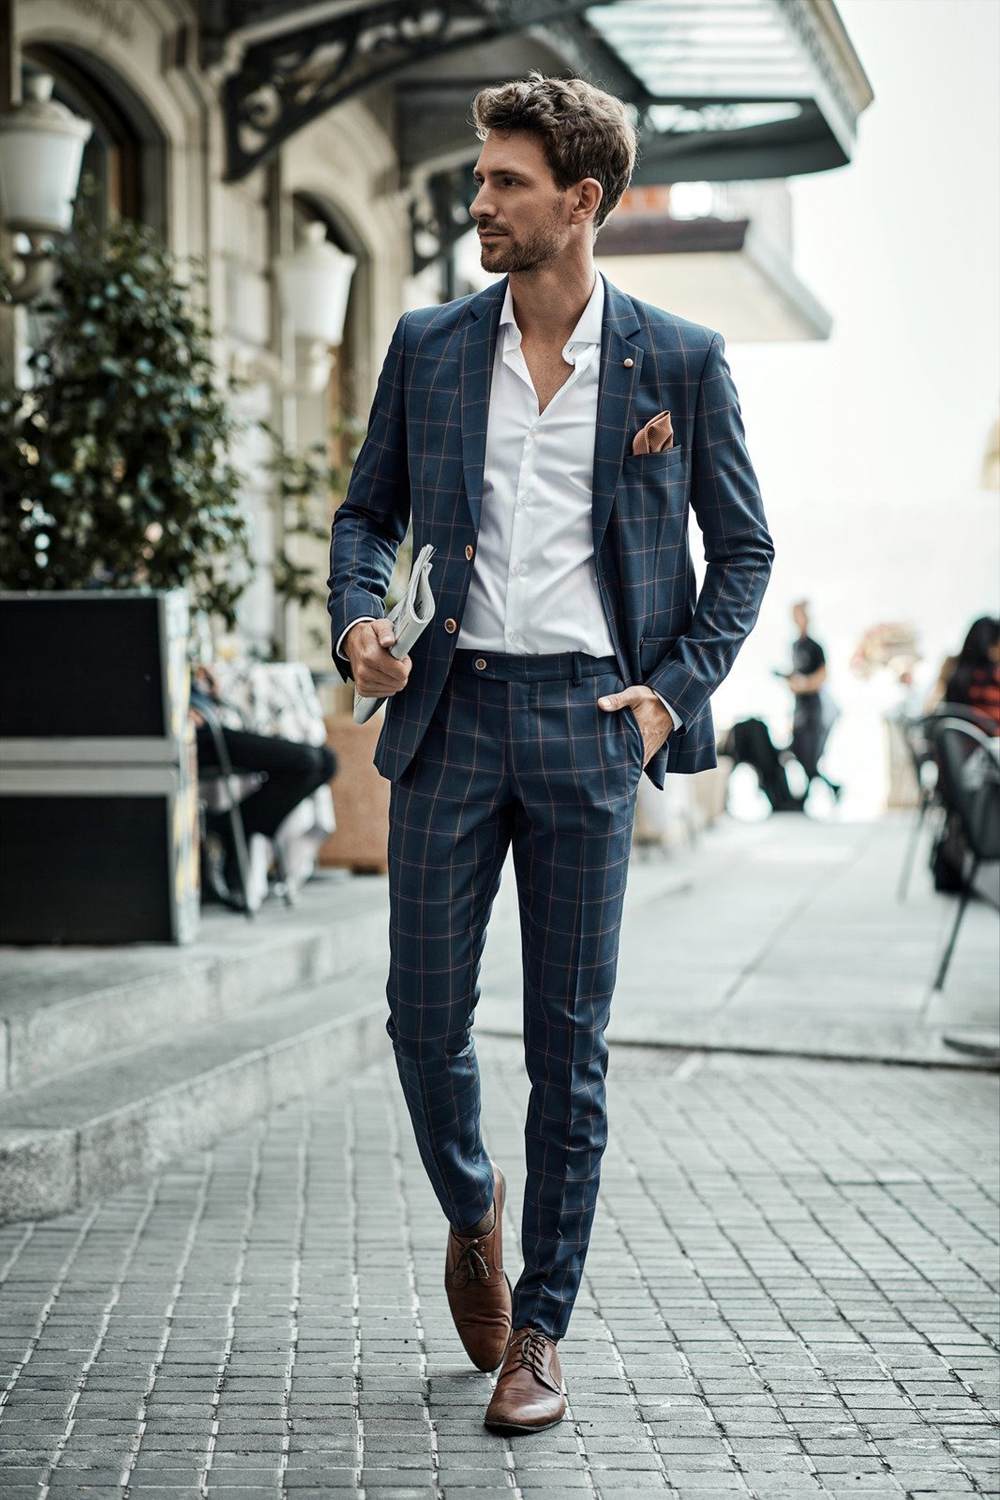 Finding the Best Tailored and Slim Fit Suits